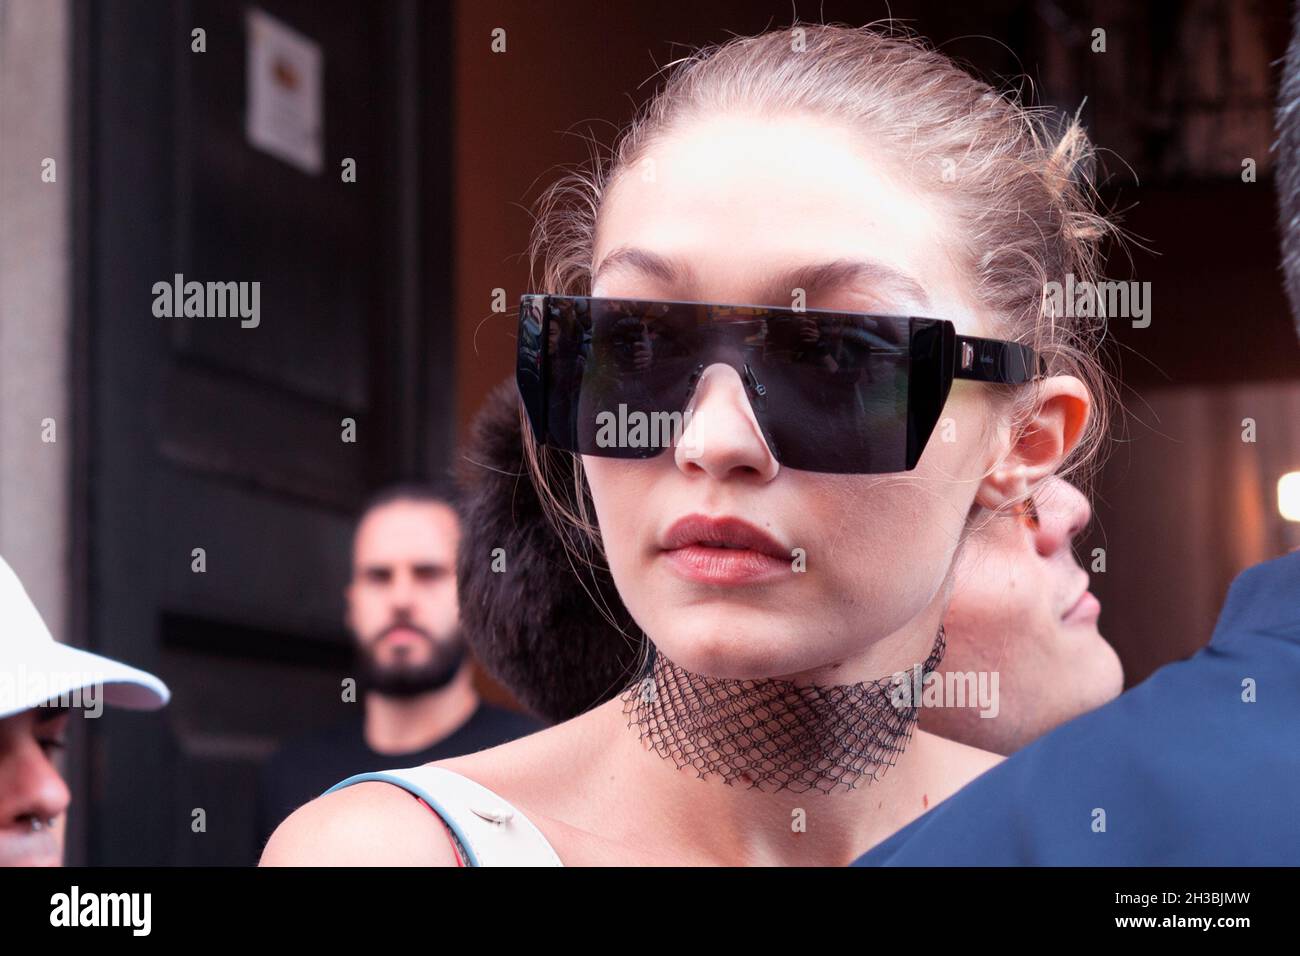 Gigi Hadid seconds before gets attacked in Milan by prankster Vitalii Sediuk, Italy 2016 Stock Photo